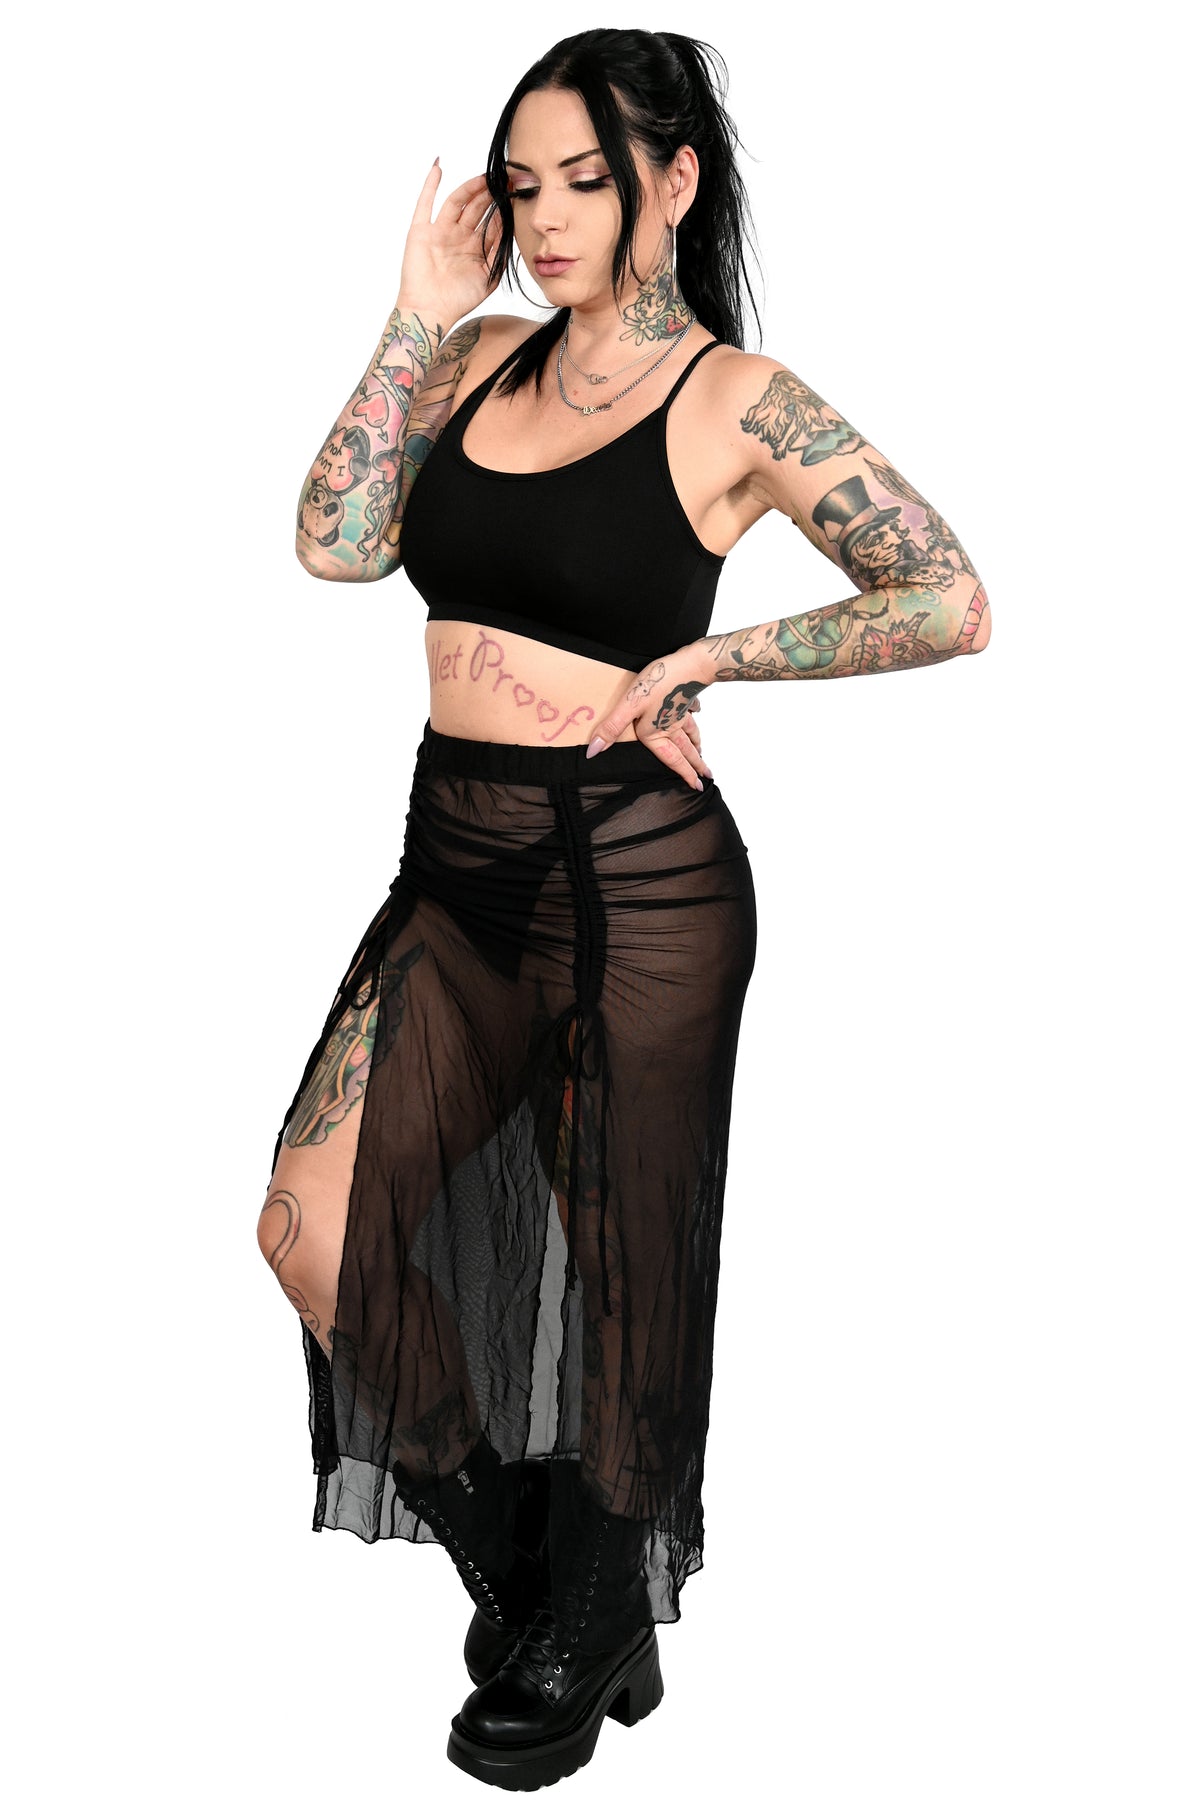 mesh maxi skirt with two adjustable ties in the front to wear this skirt as short or as long as you like